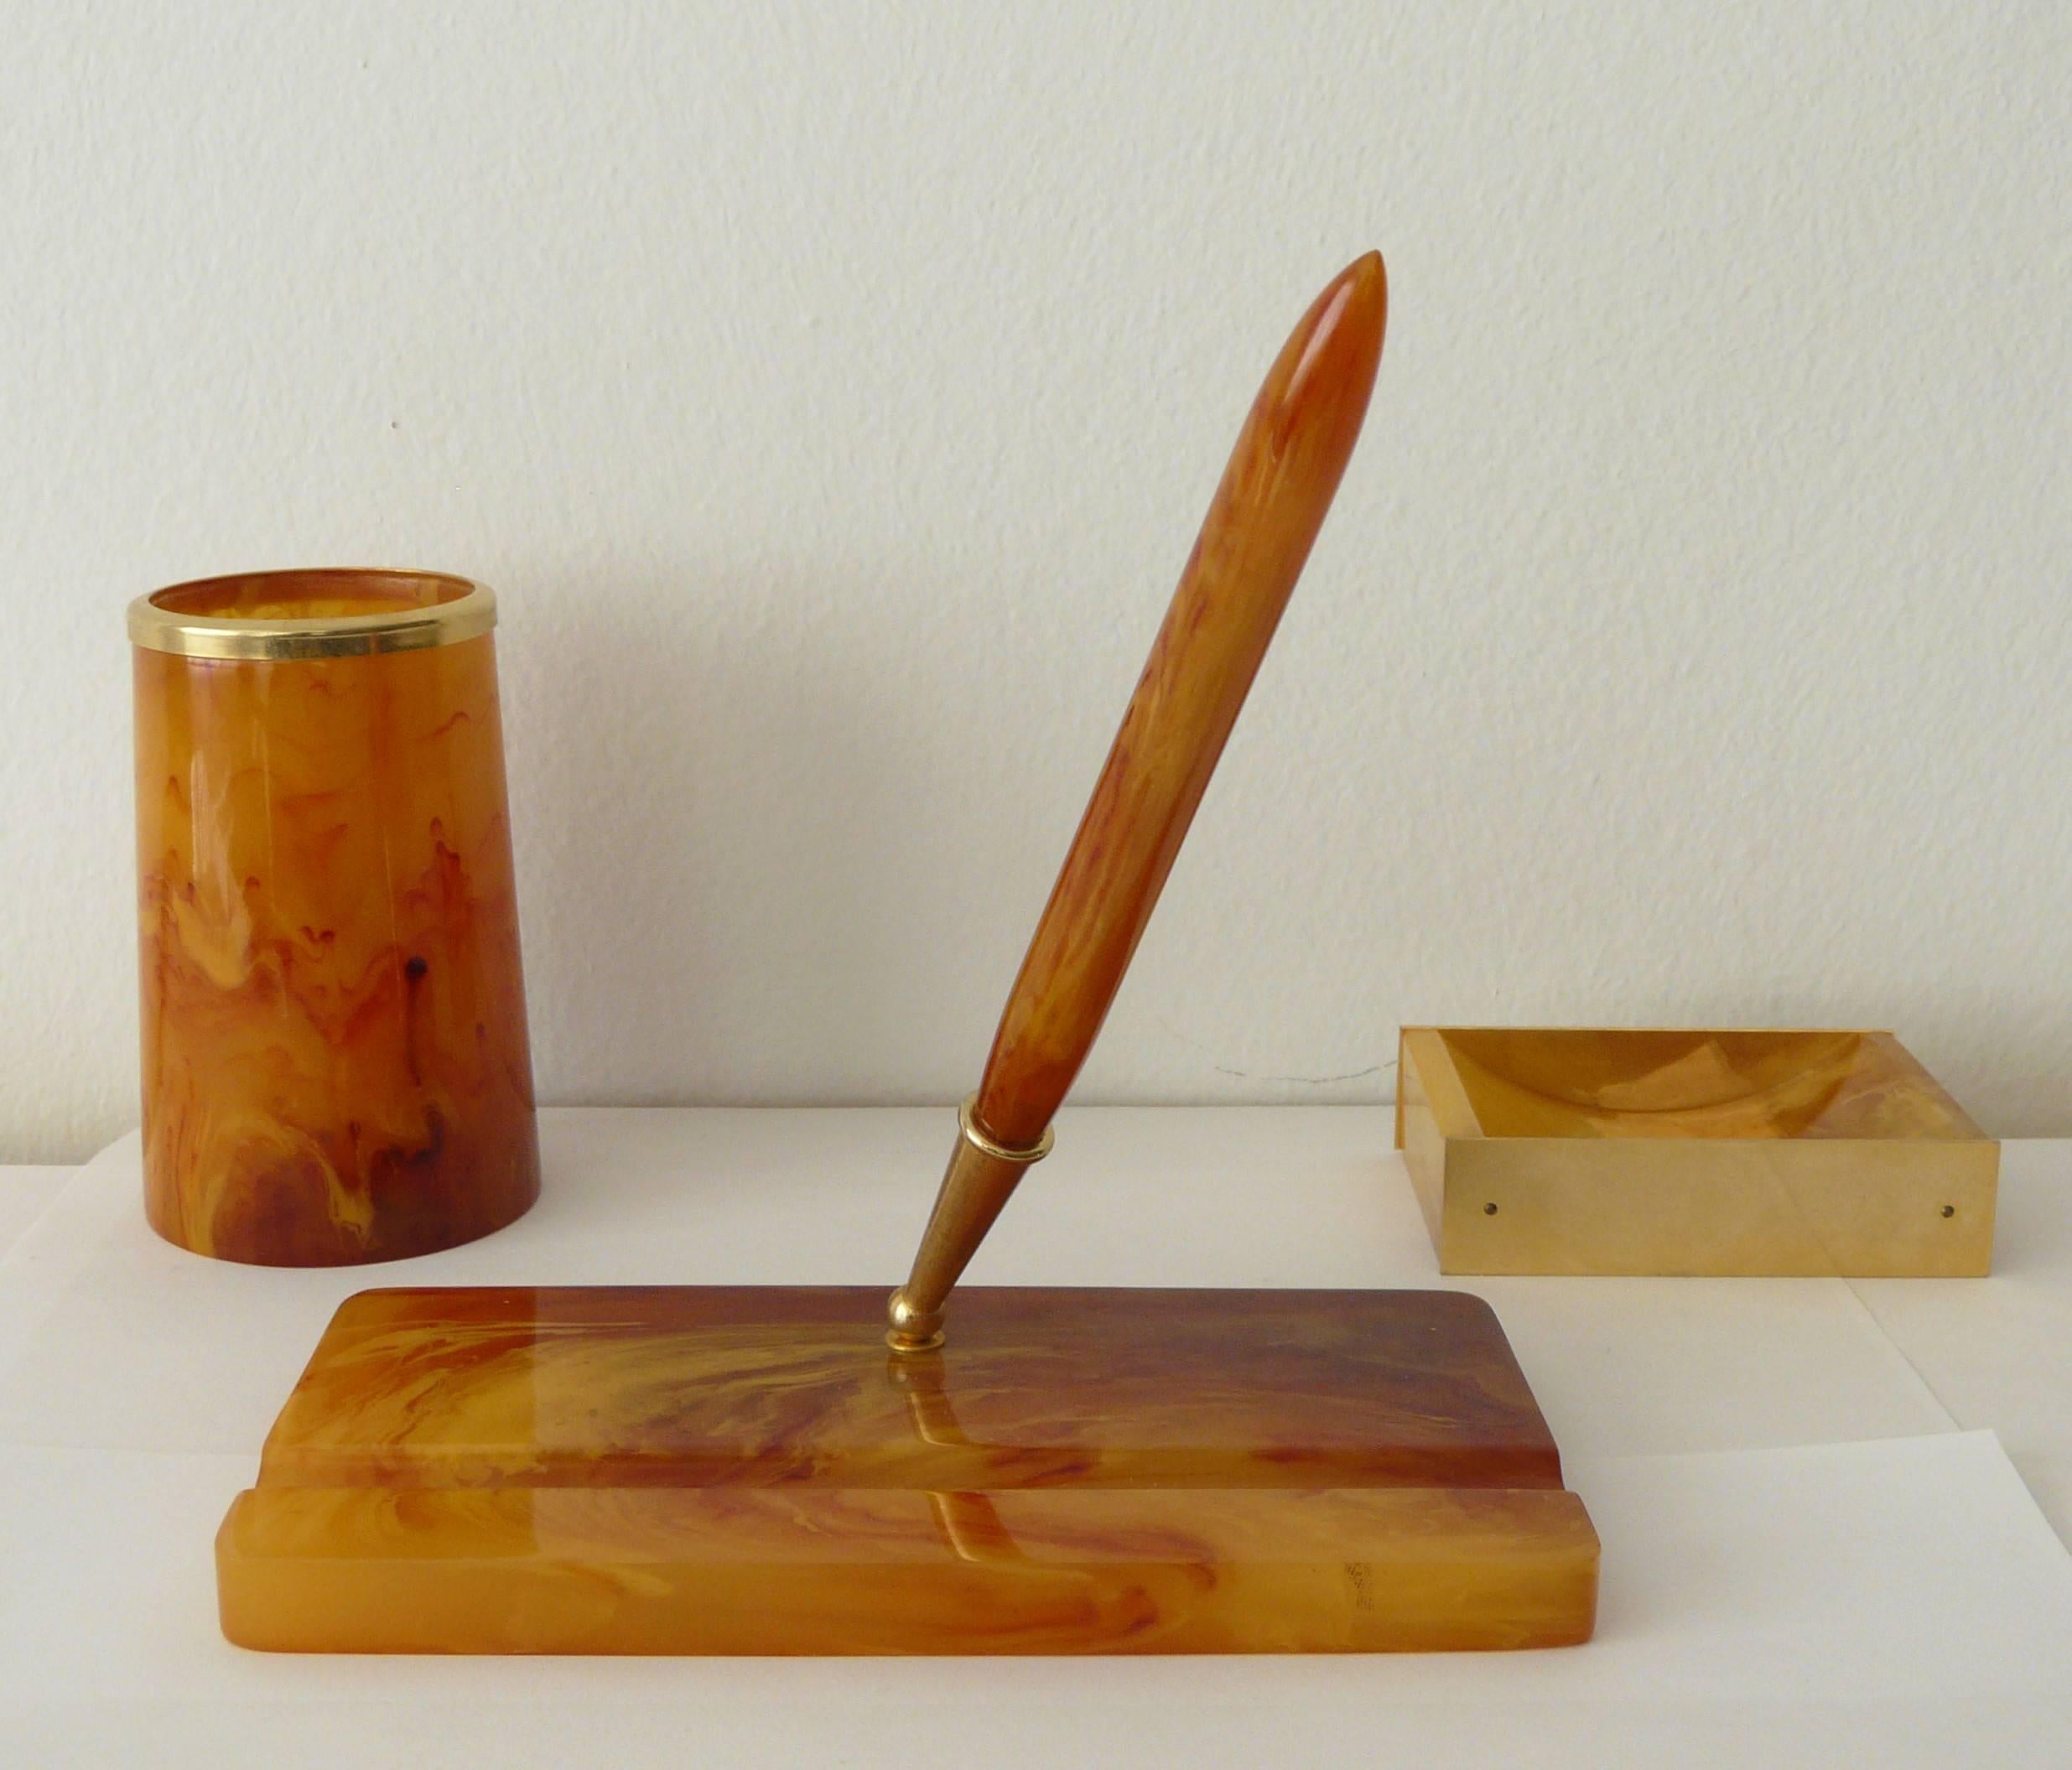 Vintage Italian bakelite desk set with pen pad, clip holder and pencil holder / Made in Italy in the 1950's
Pen Pad Dimensions:
Length: 6 inches / Width: 3.5 inches / Height: 6.5 inches
Clip Holder Dimensions:
Length: 3.25 inches / Width: 2.25